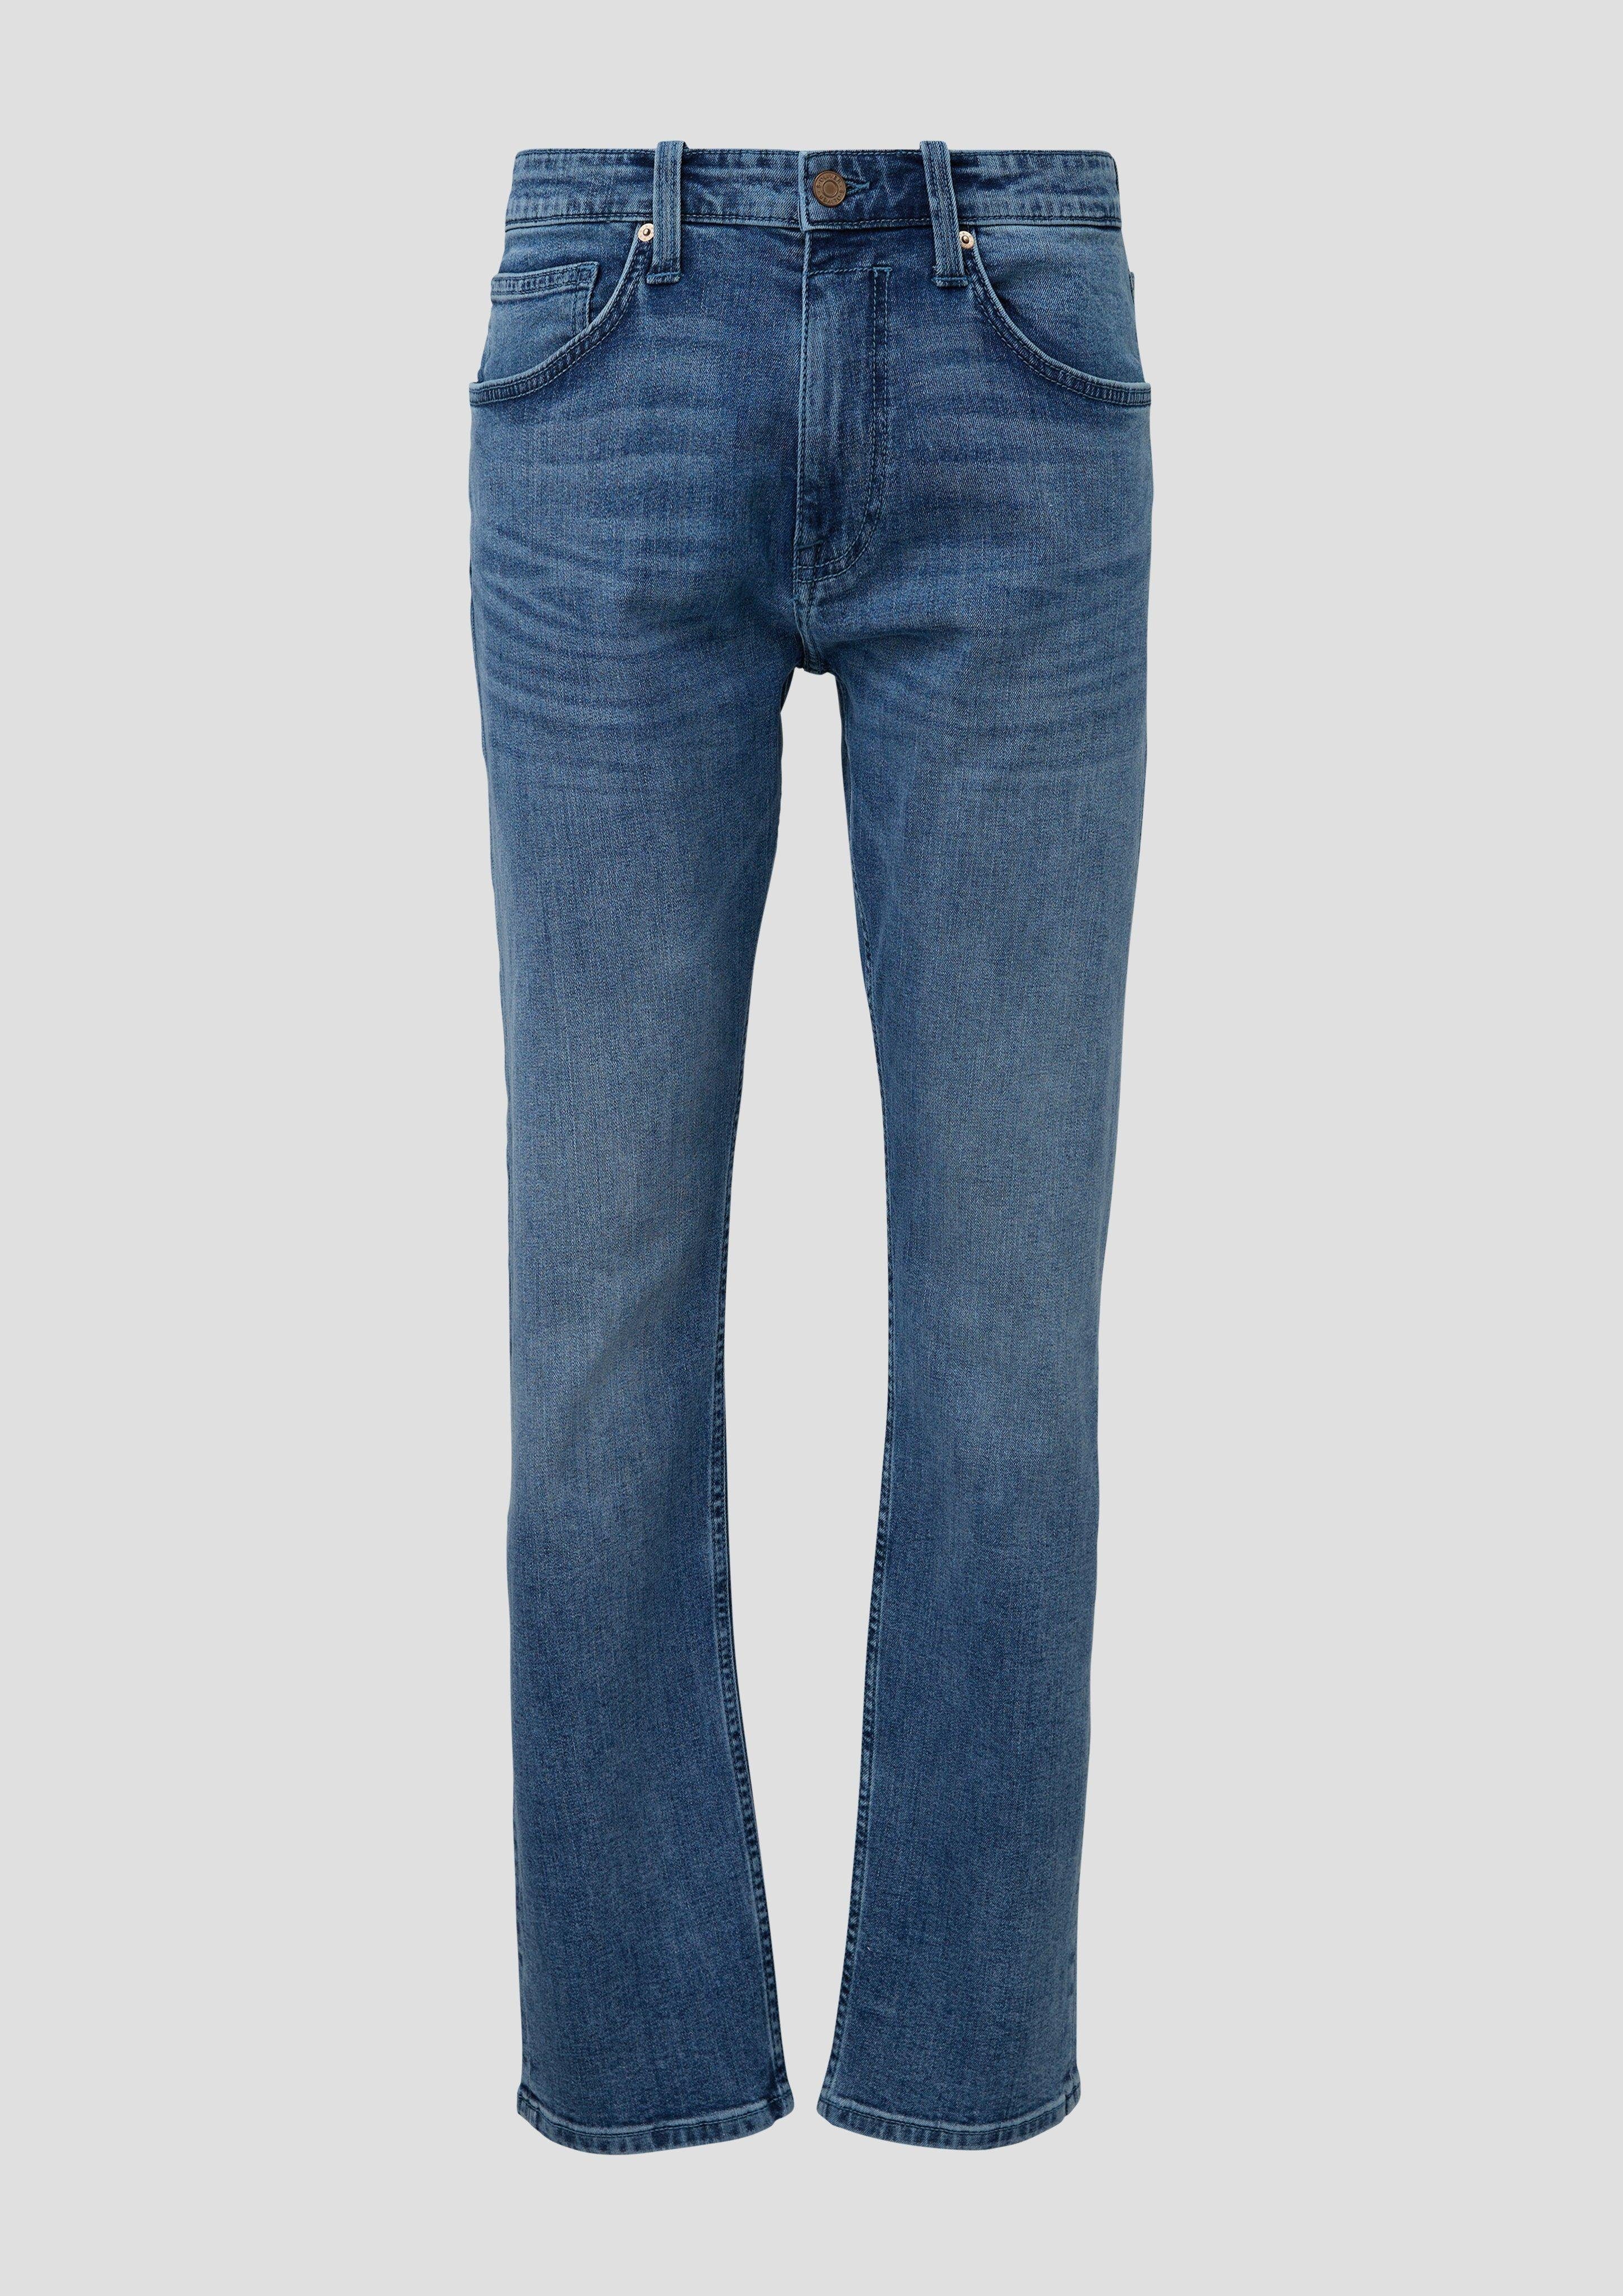 s.Oliver Stoffhose Jeans Mauro blau Fit Regular / Tapered Leg Label-Patch Rise / / High